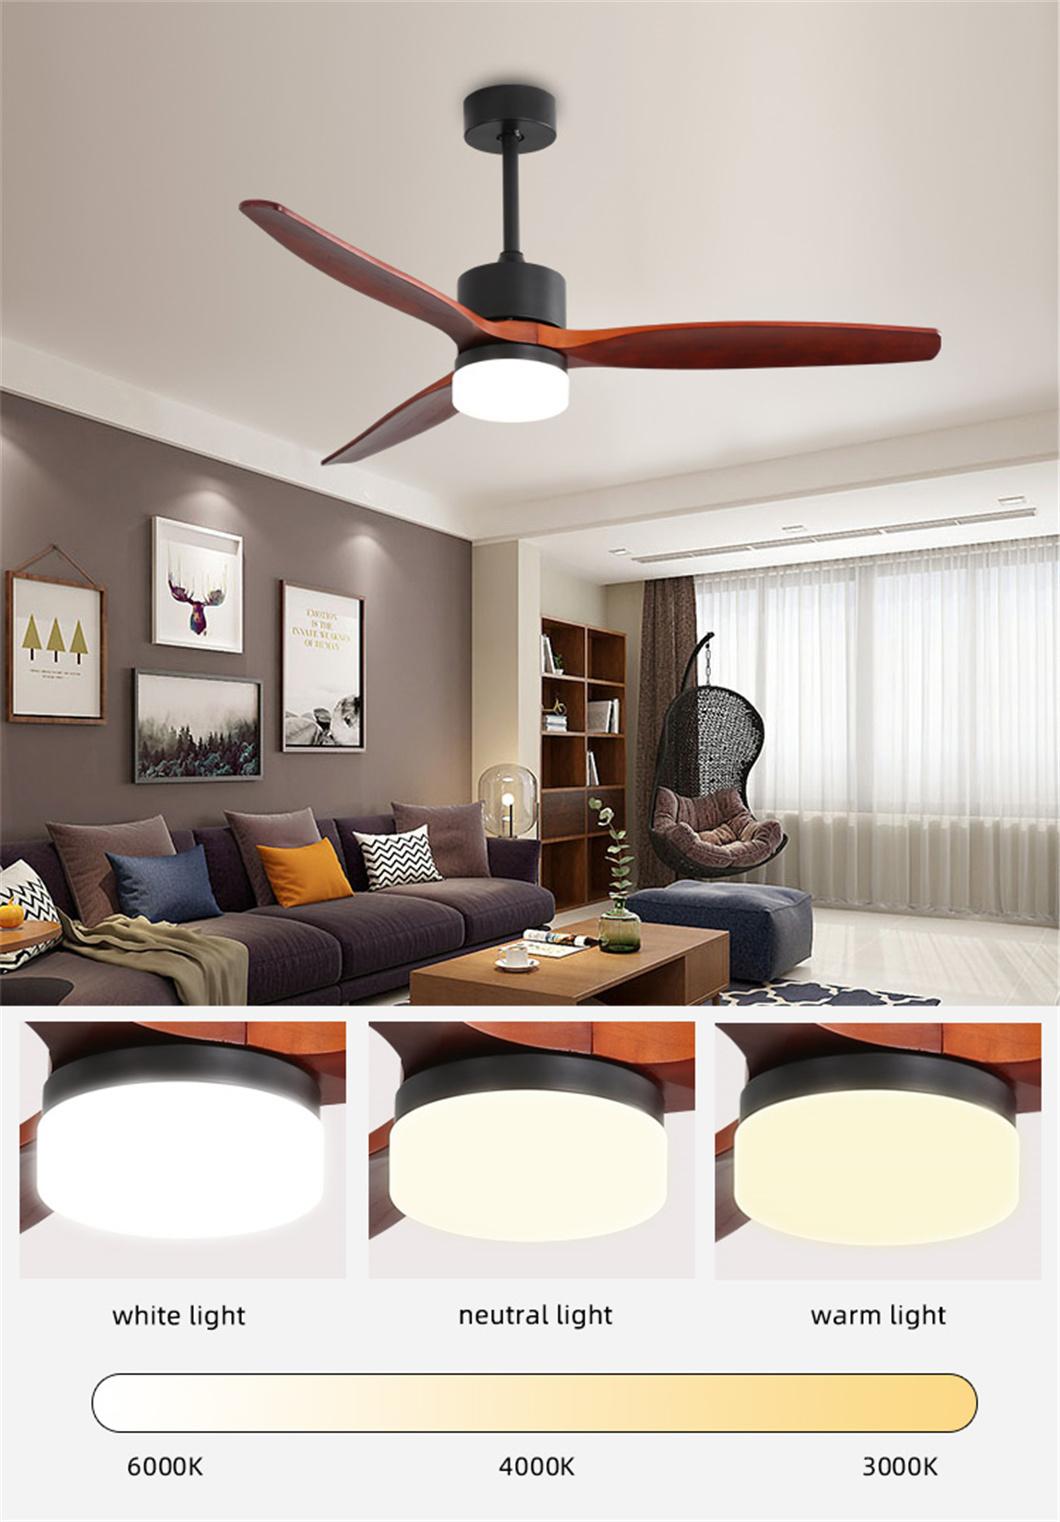 Hot Sale Remote Wall Control Solid Wood Blades 3 Fan Speed LED Ceiling Light with Fan